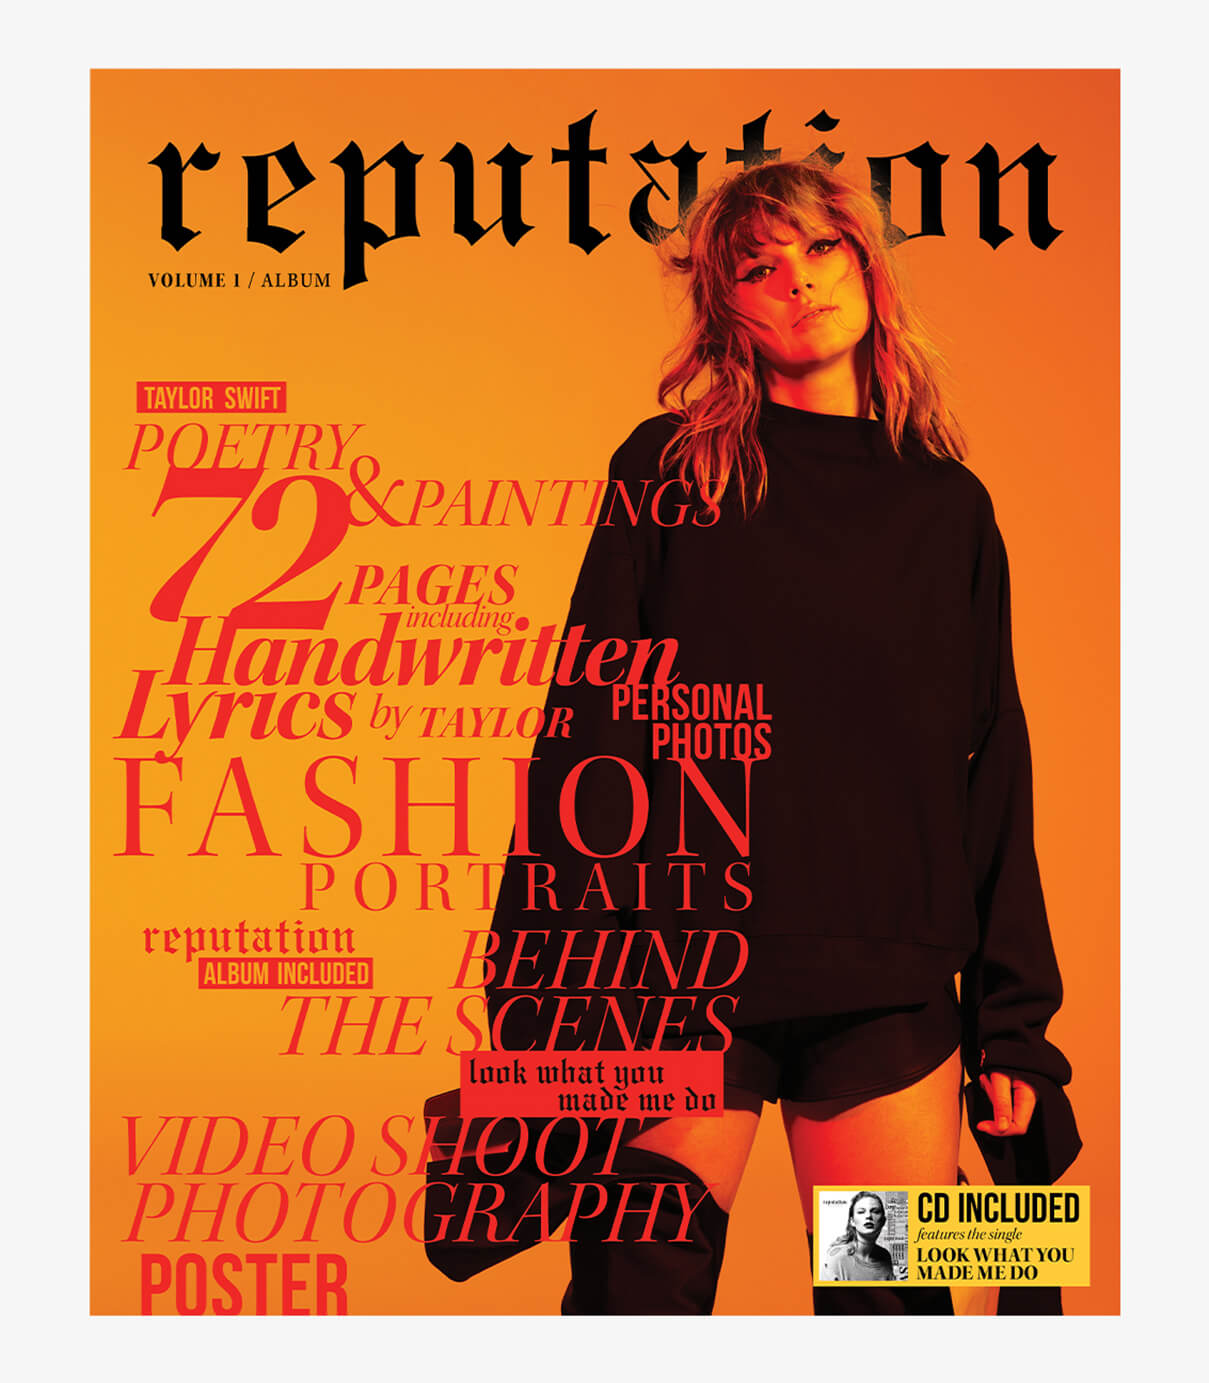 cover design of reputation vol 1 by Taylor Swift deluxe packaging